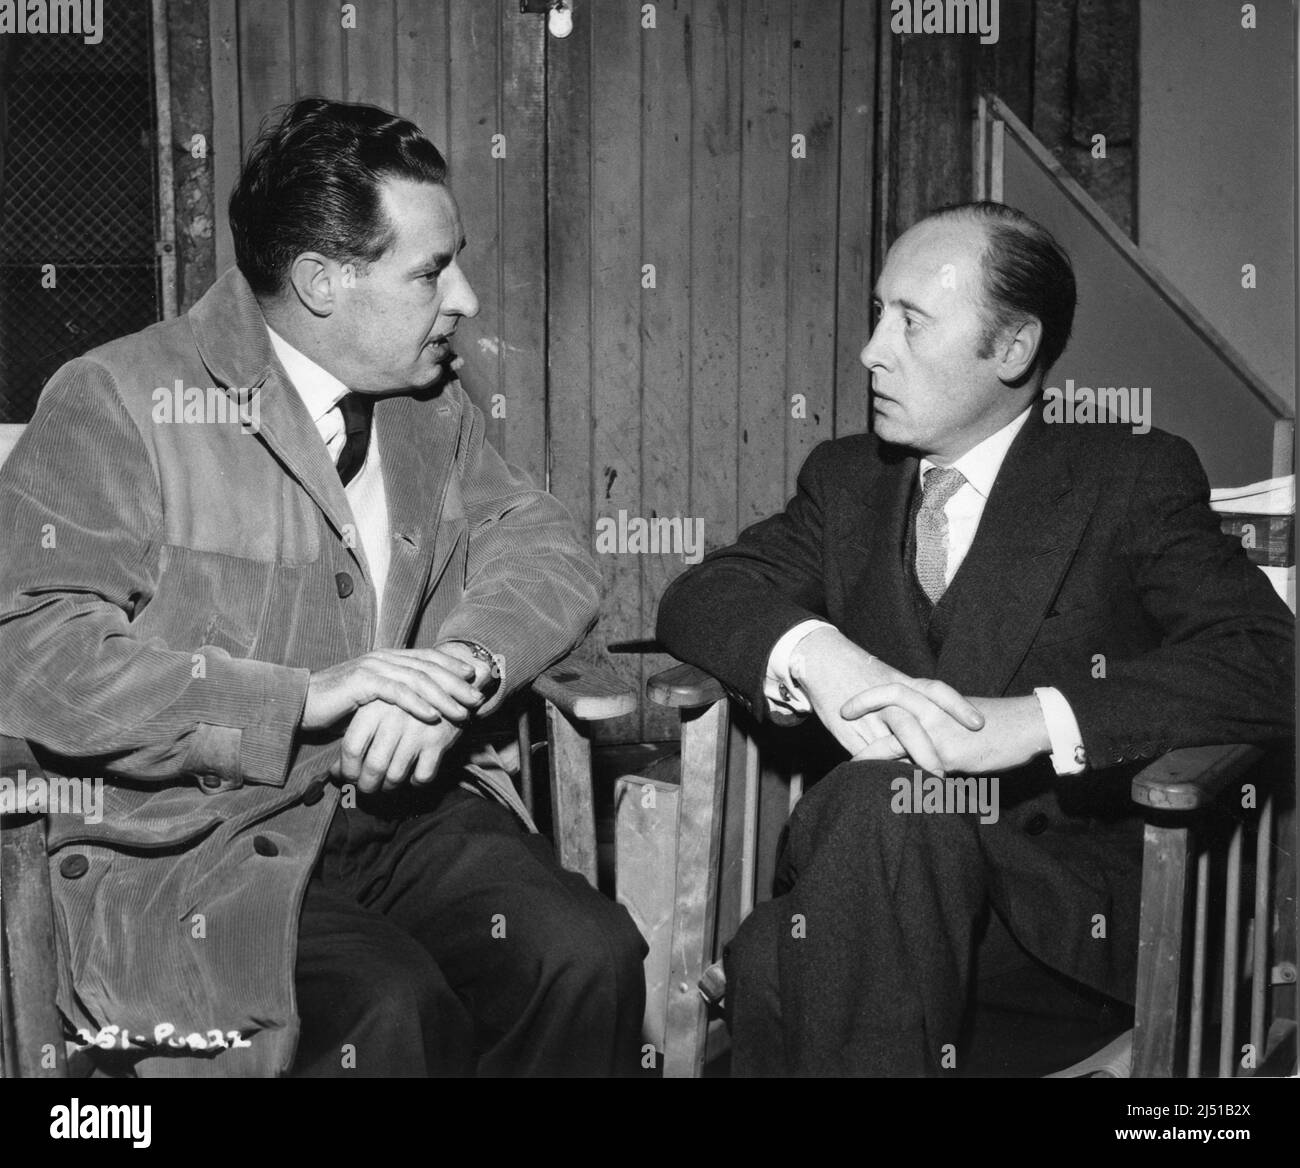 Writer TED WILLIS and Director ROY WARD BAKER on set candid during filming of FLAME IN THE STREETS 1961 director / producer ROY WARD BAKER story / play / screenplay Ted Willis Somerset Films / The Rank Organisation Stock Photo